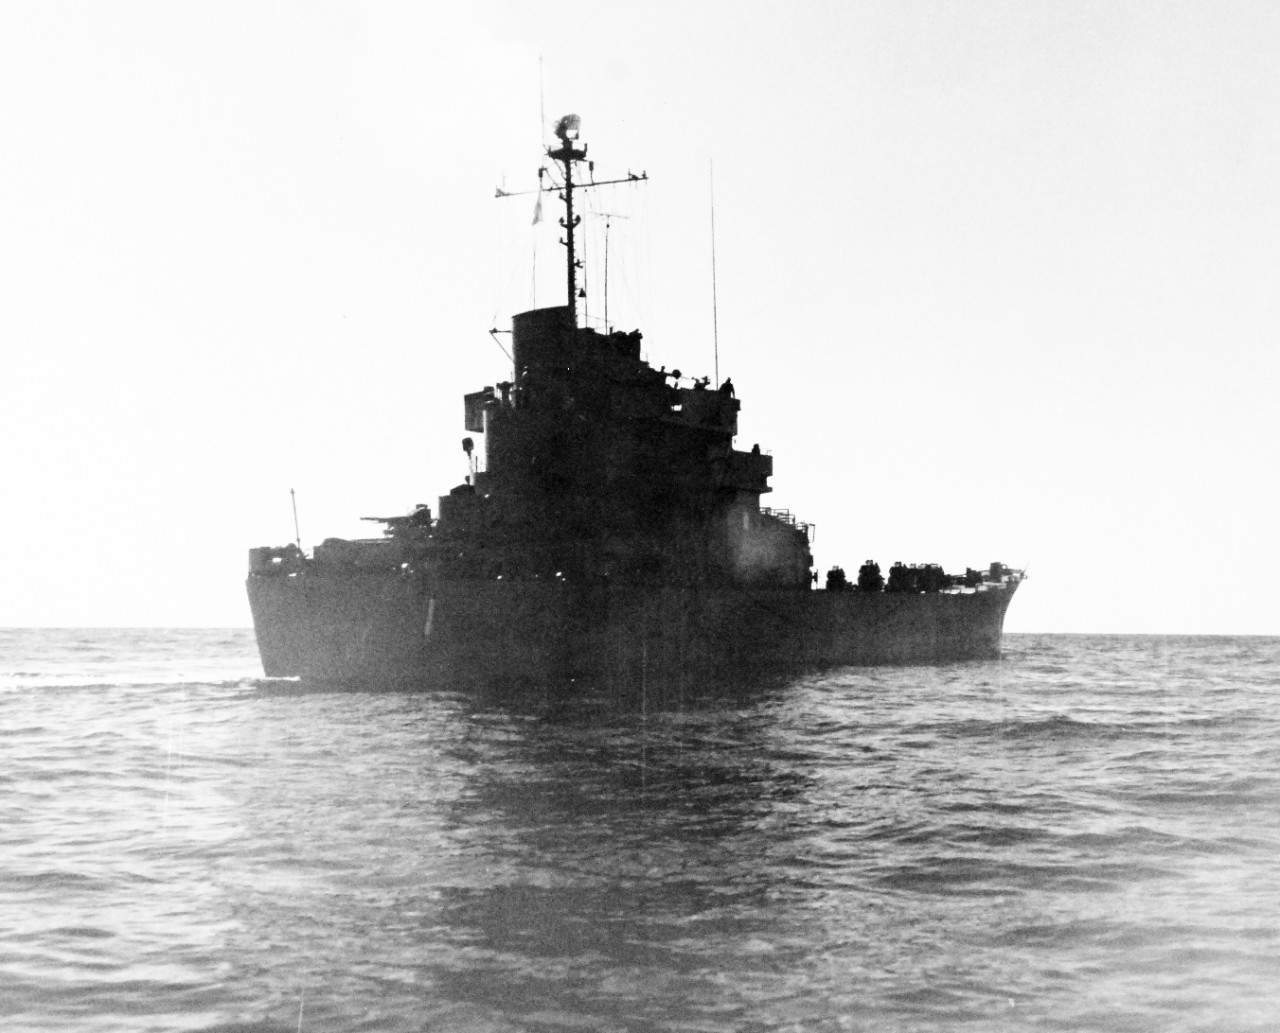 80-G-689757:  USS Carronade (IFS-1), 1955-59.  Carronade was an Inshore Fire Support Ship, built to provide gunfire support to amphibious landings or operations close to shore. Official U.S. Navy Photograph, now in the collections of the National Archives.  (2017/11/01).  Photograph is extremely curved.  